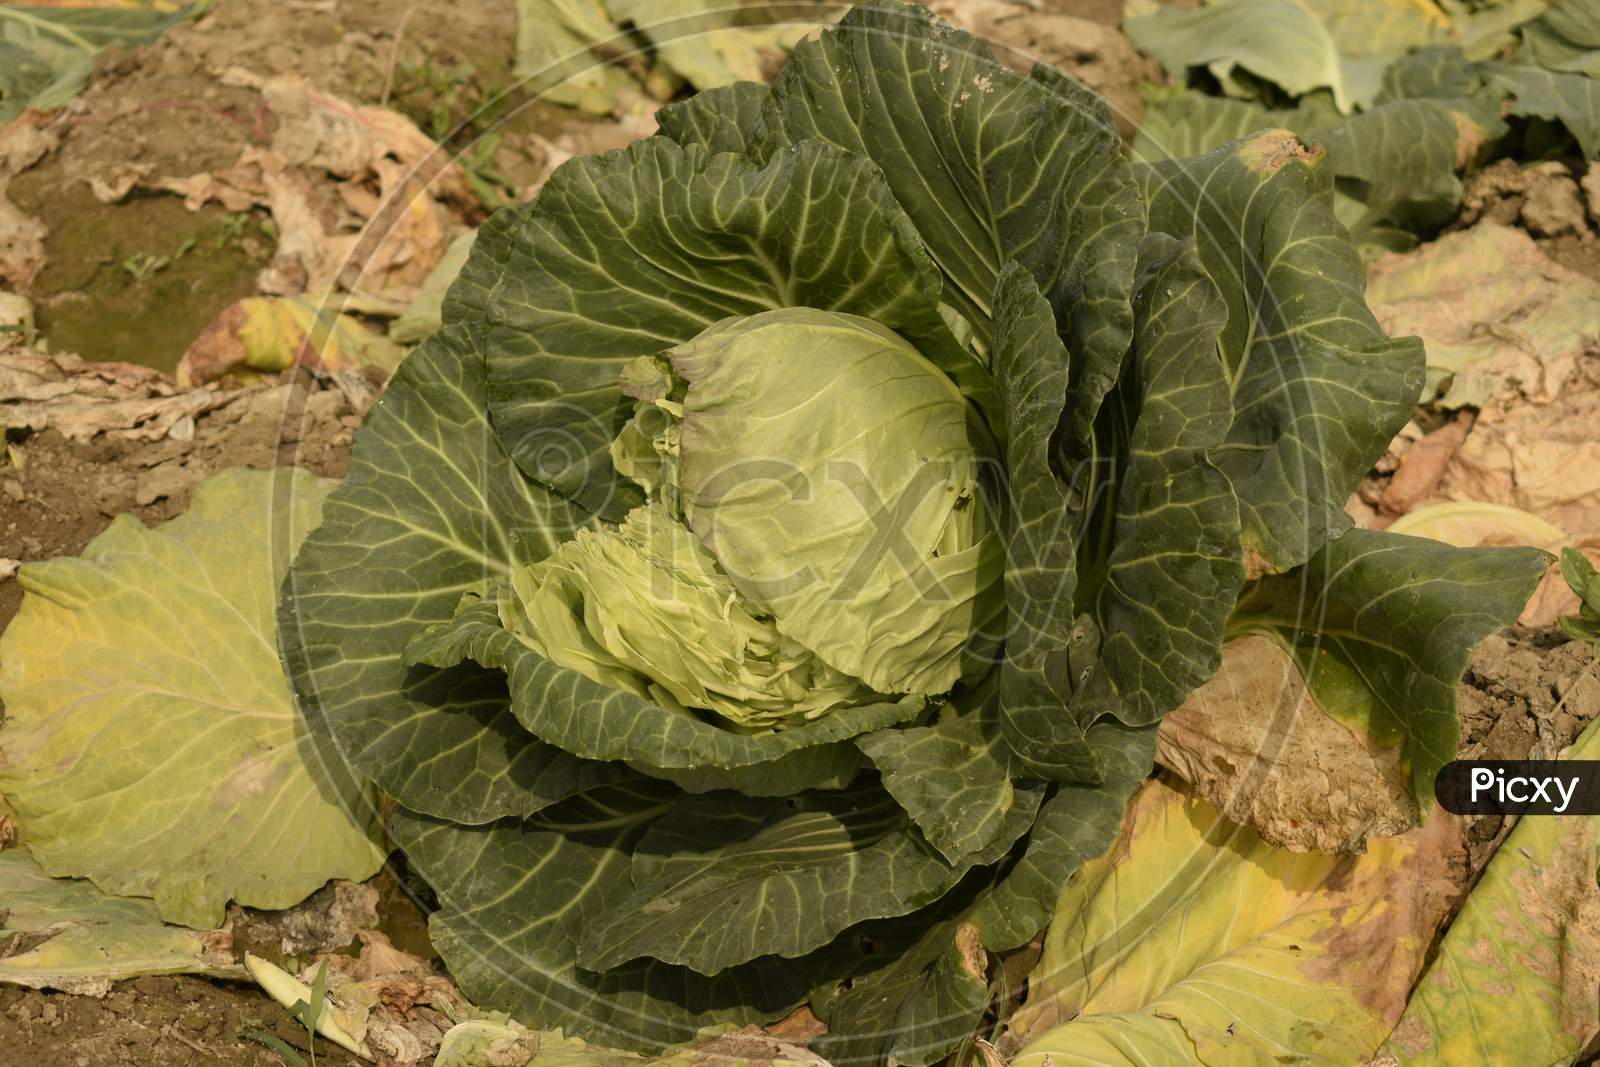 Cultivation Of Cabbage Flower In The Field